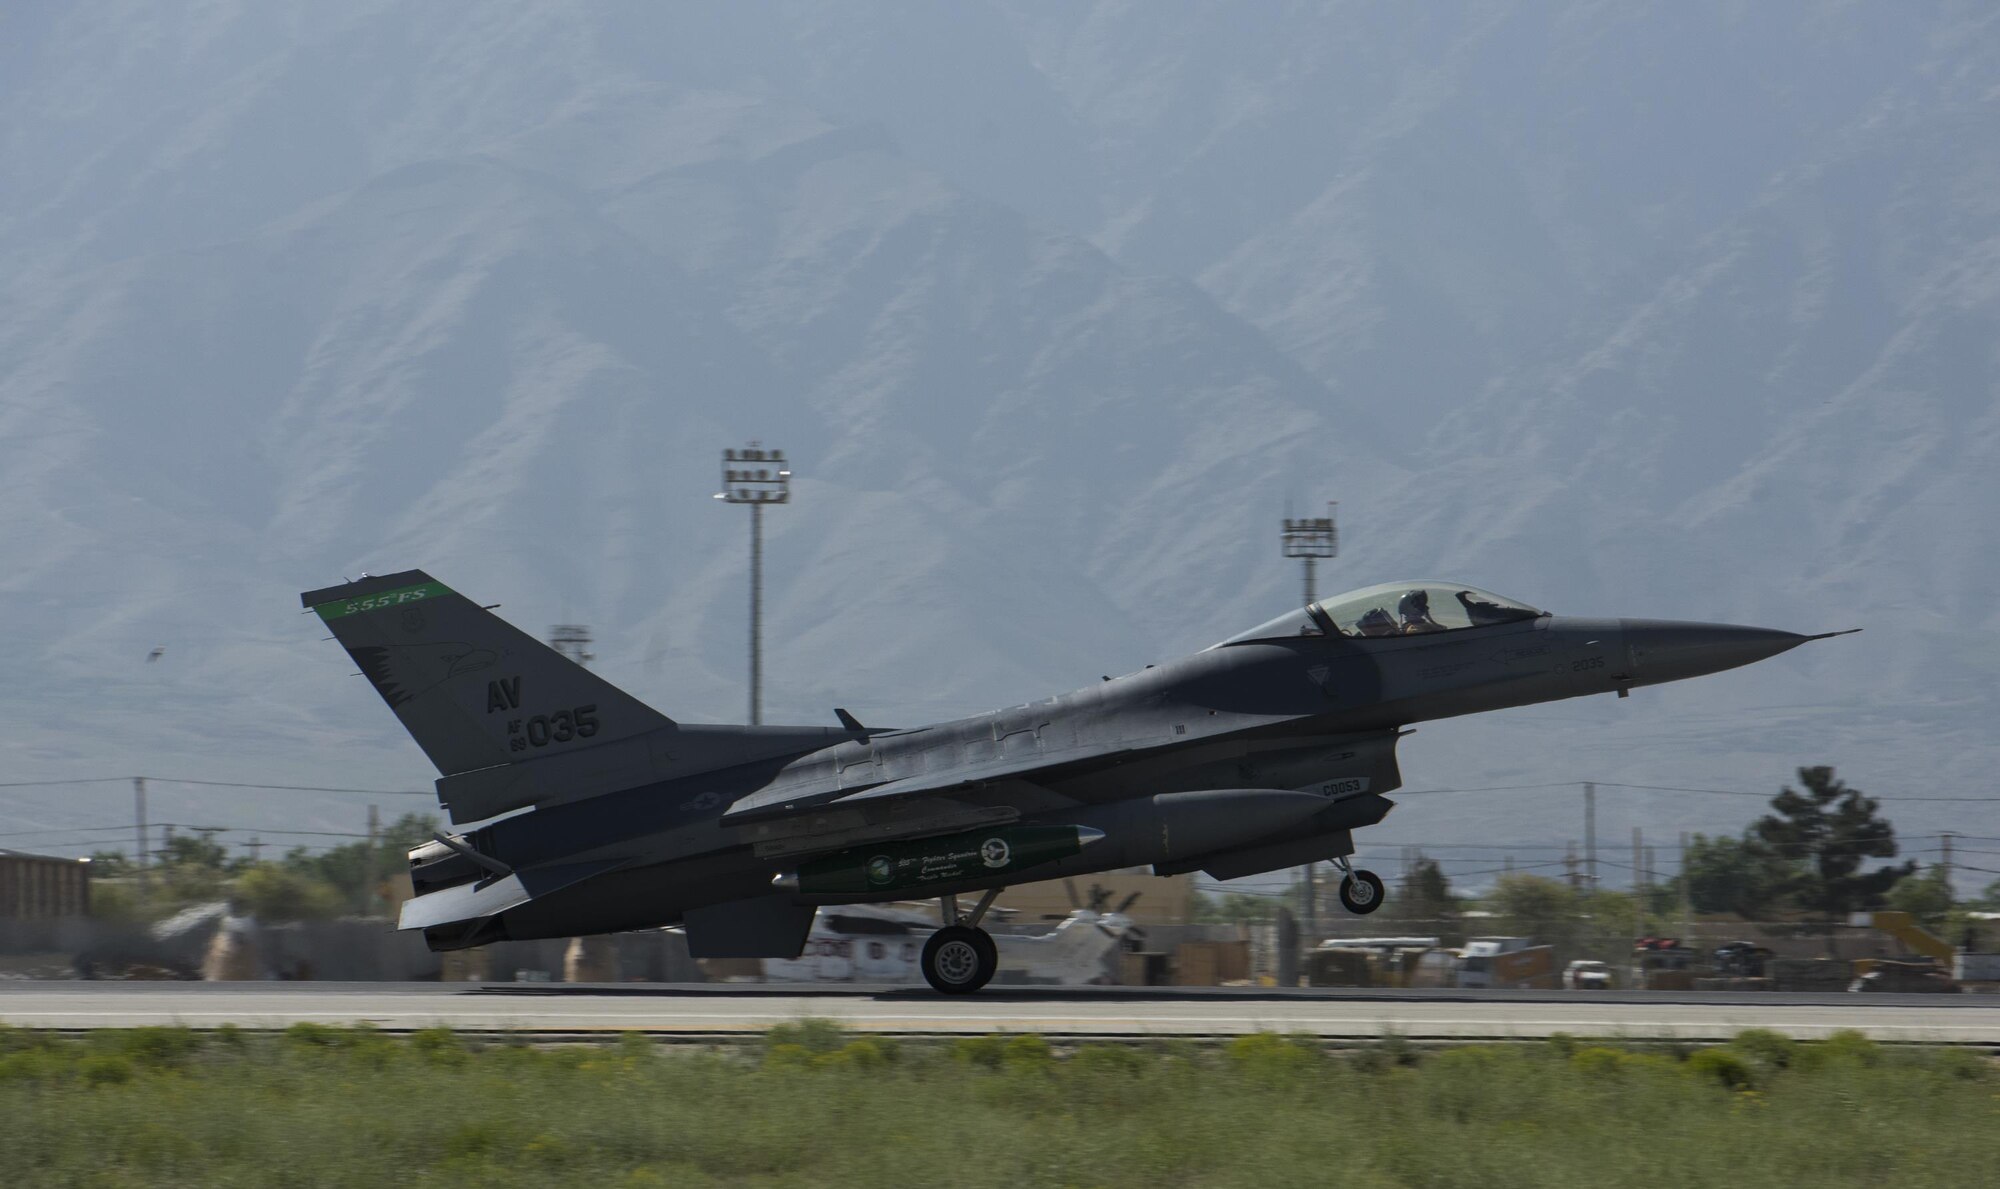 An F-16 Fighting Falcon, from the 555th Expeditionary Fighter Squadron, Aviano Air Base, Italy, lands on Bagram Airfield, Afghanistan, April 25, 2017. The 555th EFS deployed to Bagram Airfield as part of a rotation of fighters, which have had a constant presence in Afghanistan for more than a decade. (U.S. Air Force photo by Staff Sgt. Benjamin Gonsier)